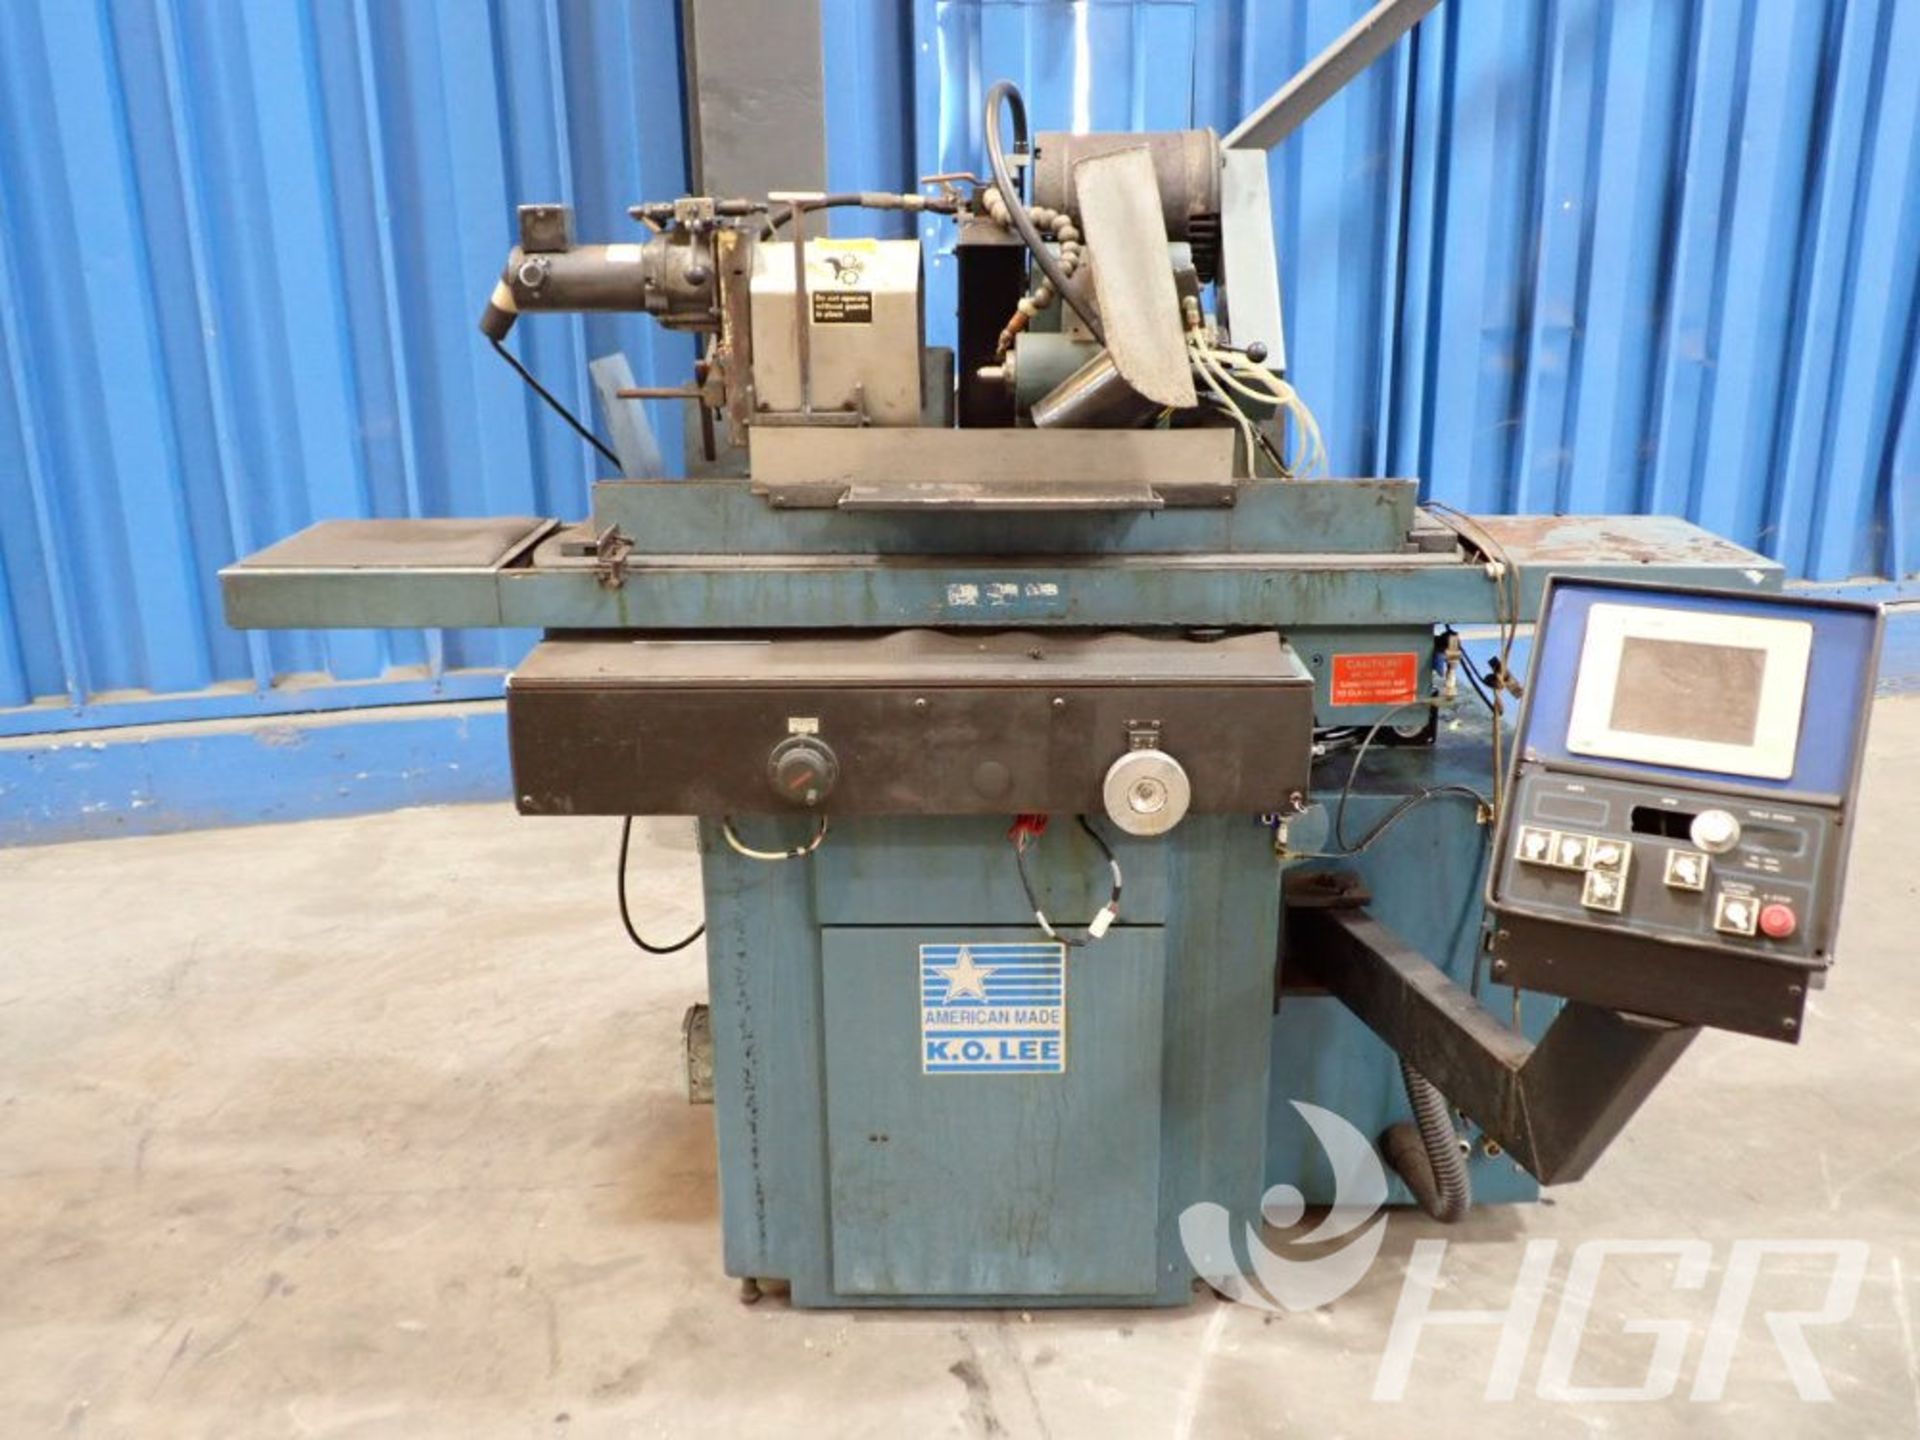 K.O LEE CYLINDRICAL GRINDER, Model C1020L2, Date: n/a; s/n 27475, Approx. Capacity: 5HP , Power: 3/ - Image 2 of 21